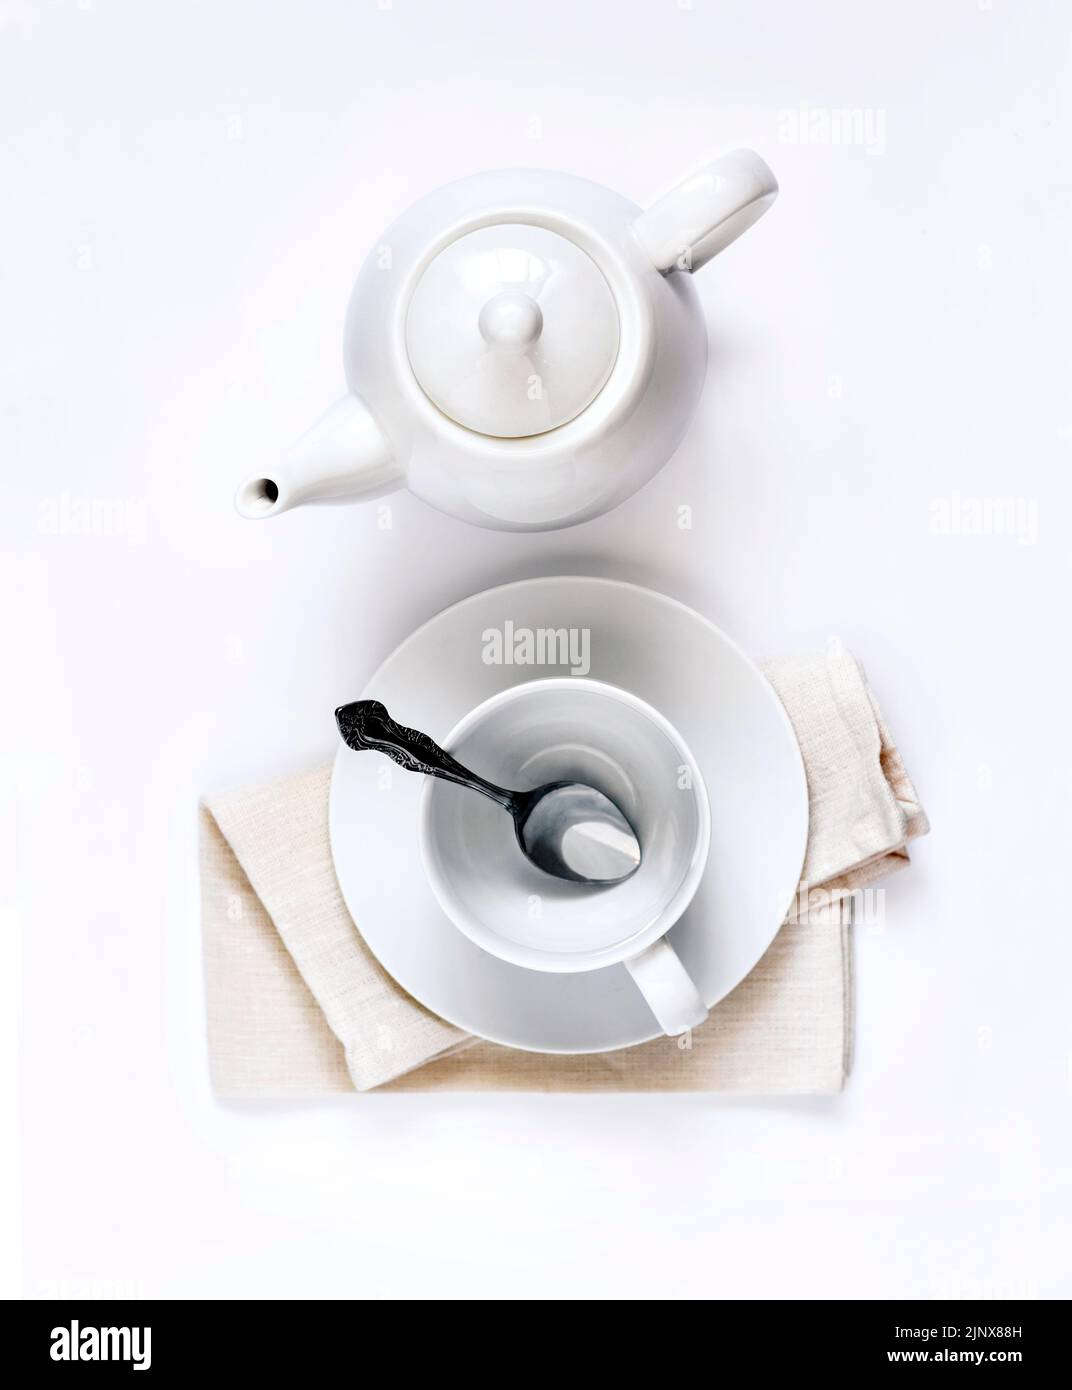 White teapot and empty teacup with spoon on pale beige cloth isolated on white background. Flat lay, top view Stock Photo